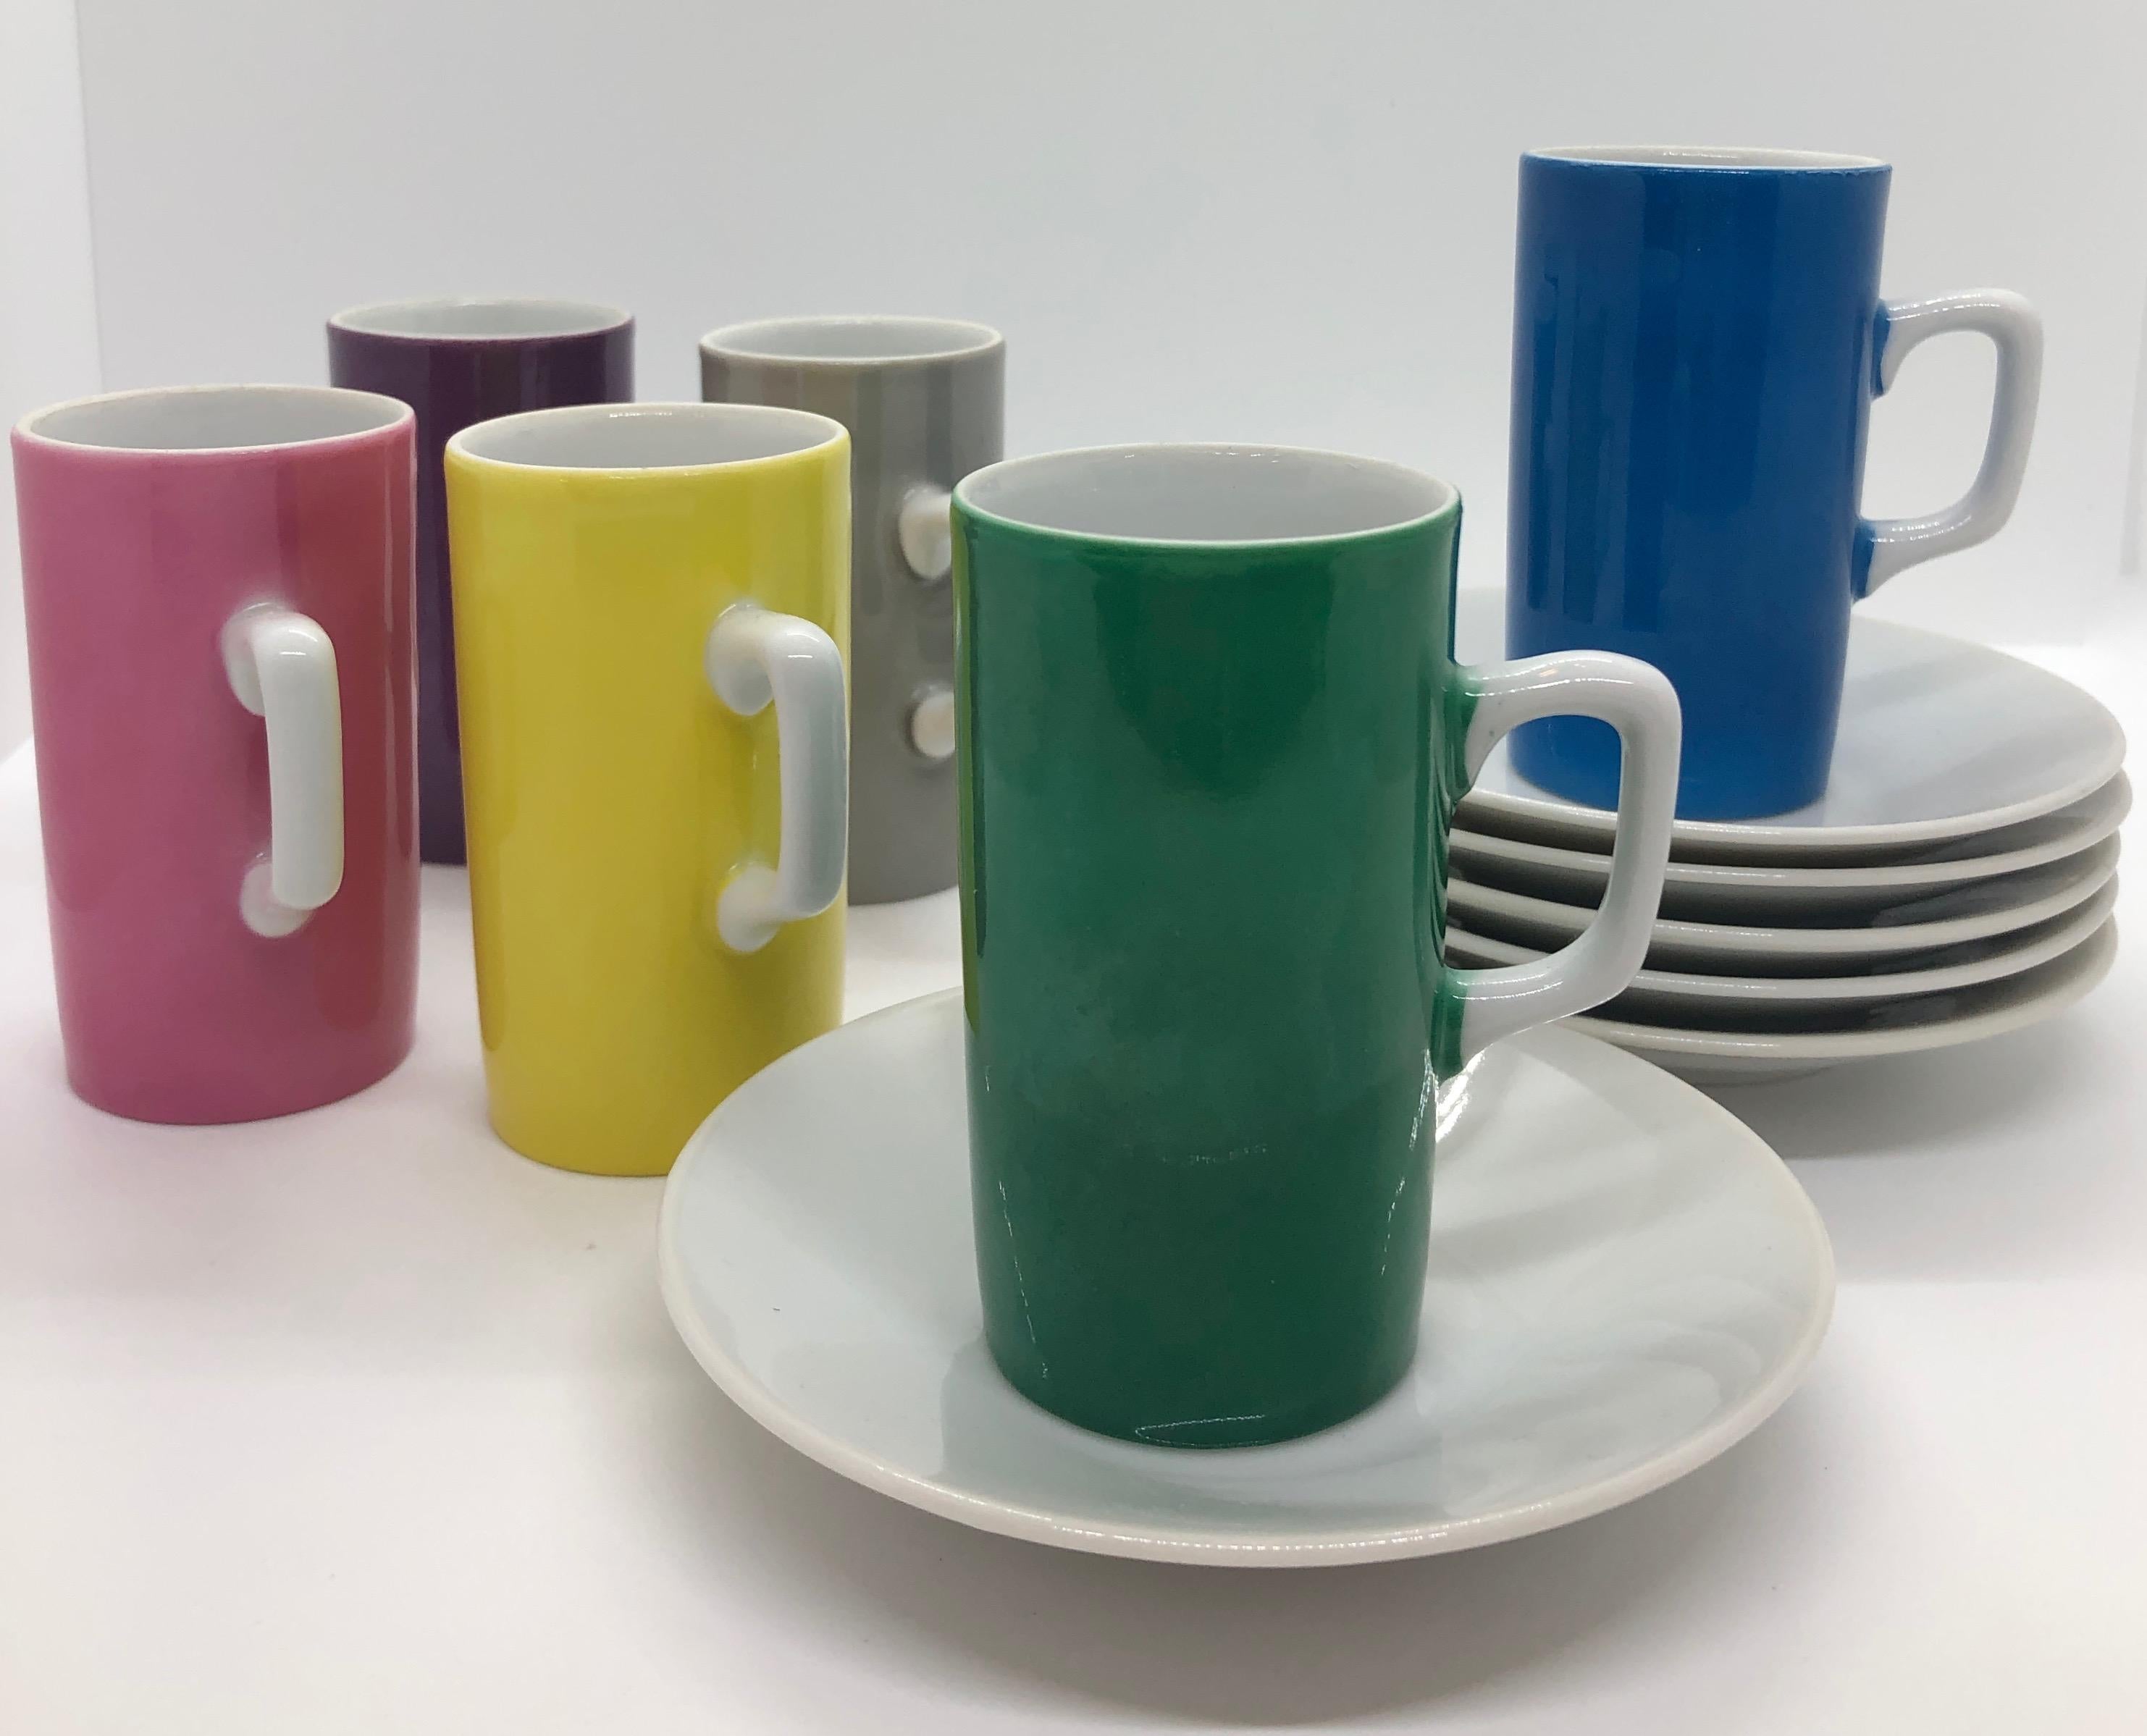 Mid-Century Modern Green, Blue, Yellow, Pink and Gray Porcelain Coffee, Tea & Dessert Cups & Plates For Sale